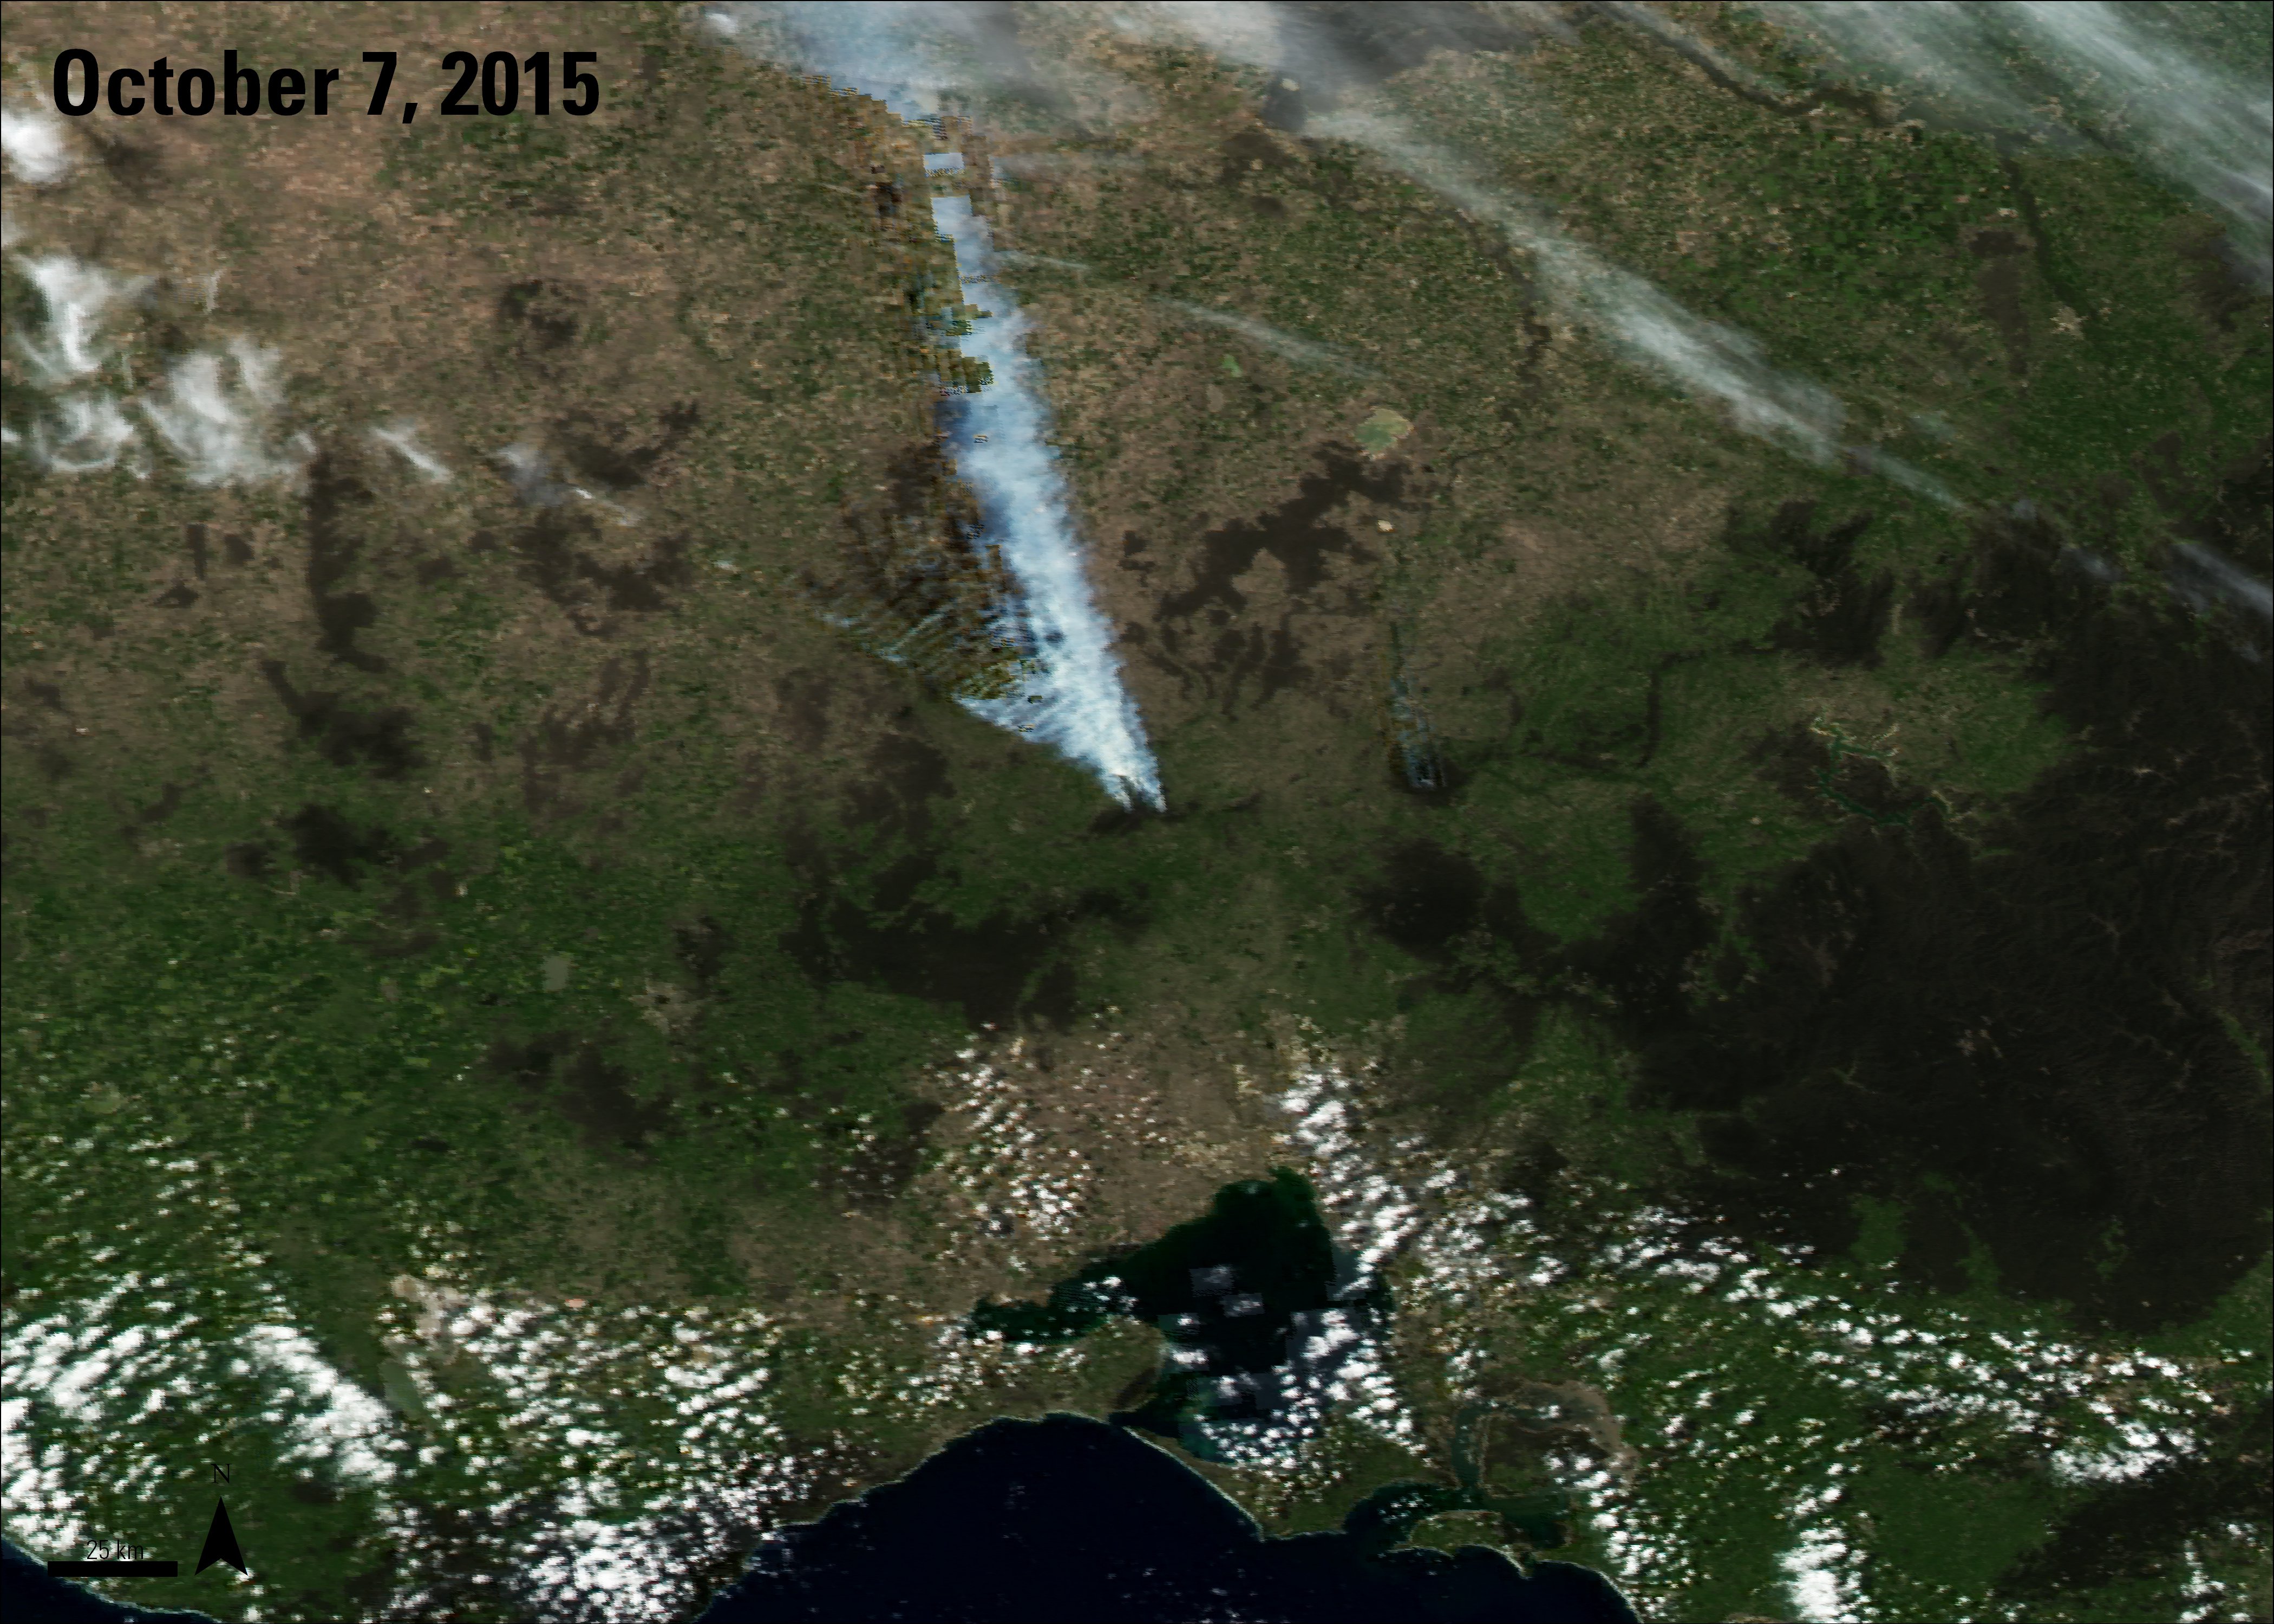 MOD14A2 product showing brush fires in Victoria, Australia, acquired October 7, 2015.